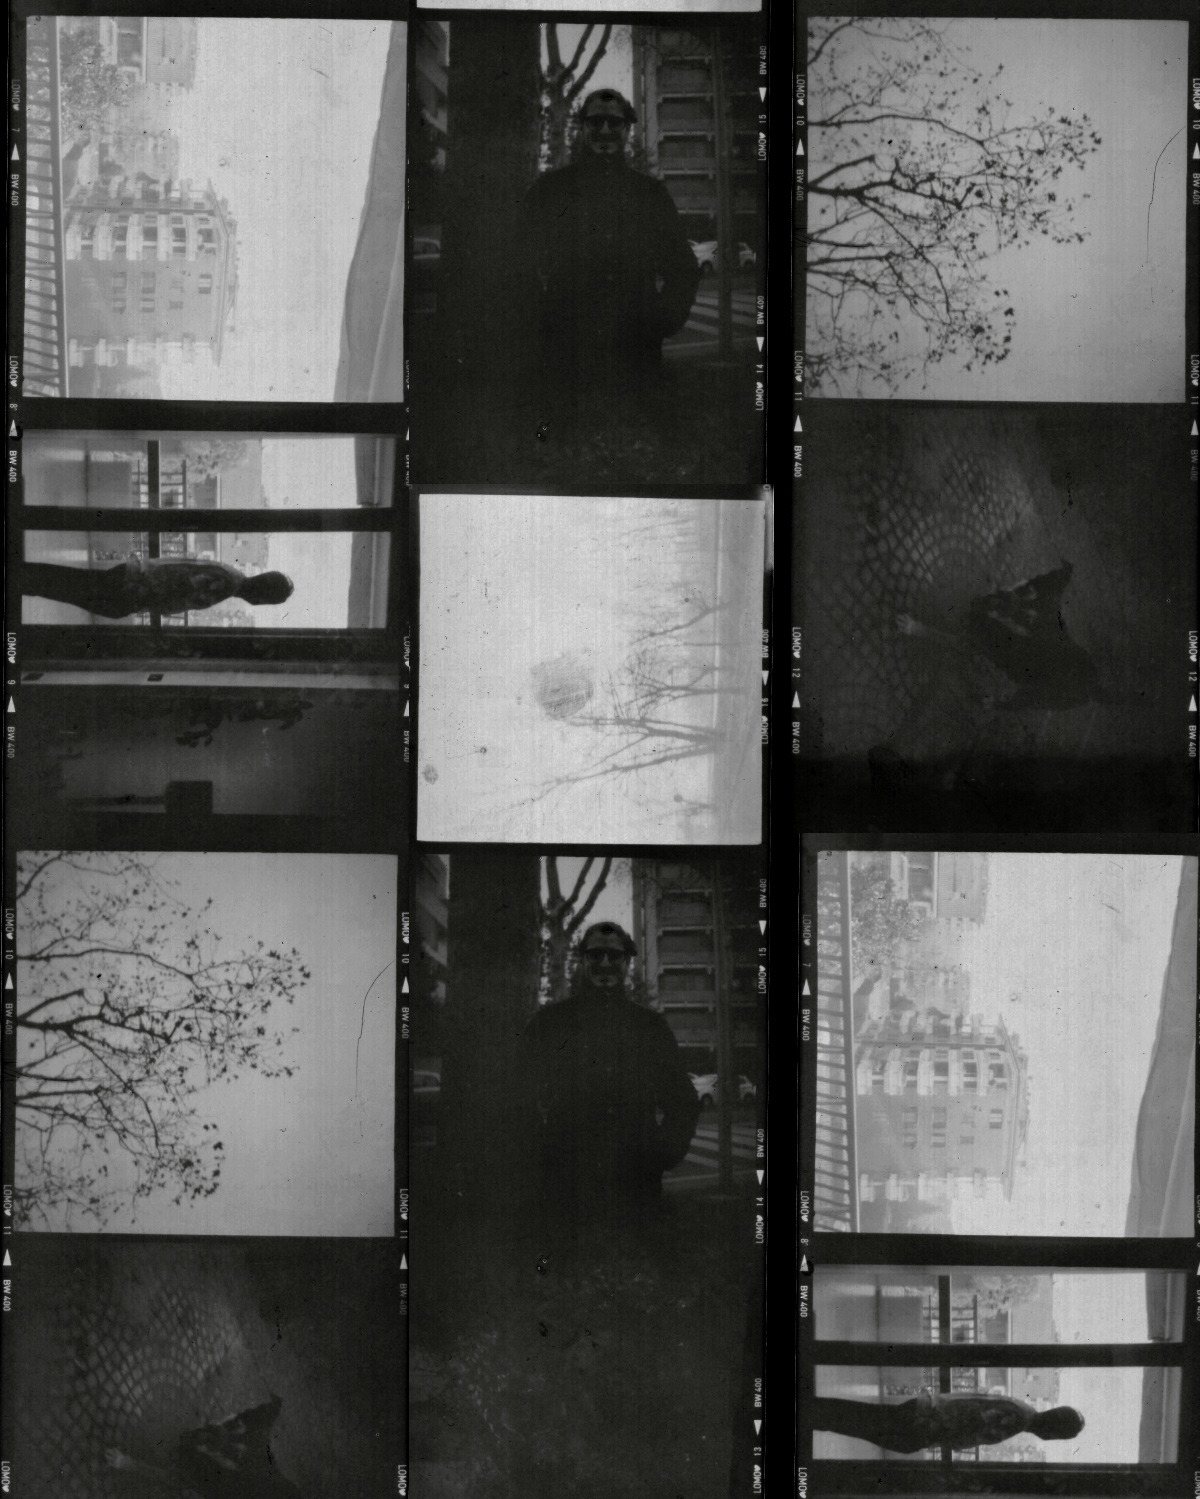 Film Photography Darkroom: how to develop black & white film rolls in daylight at home